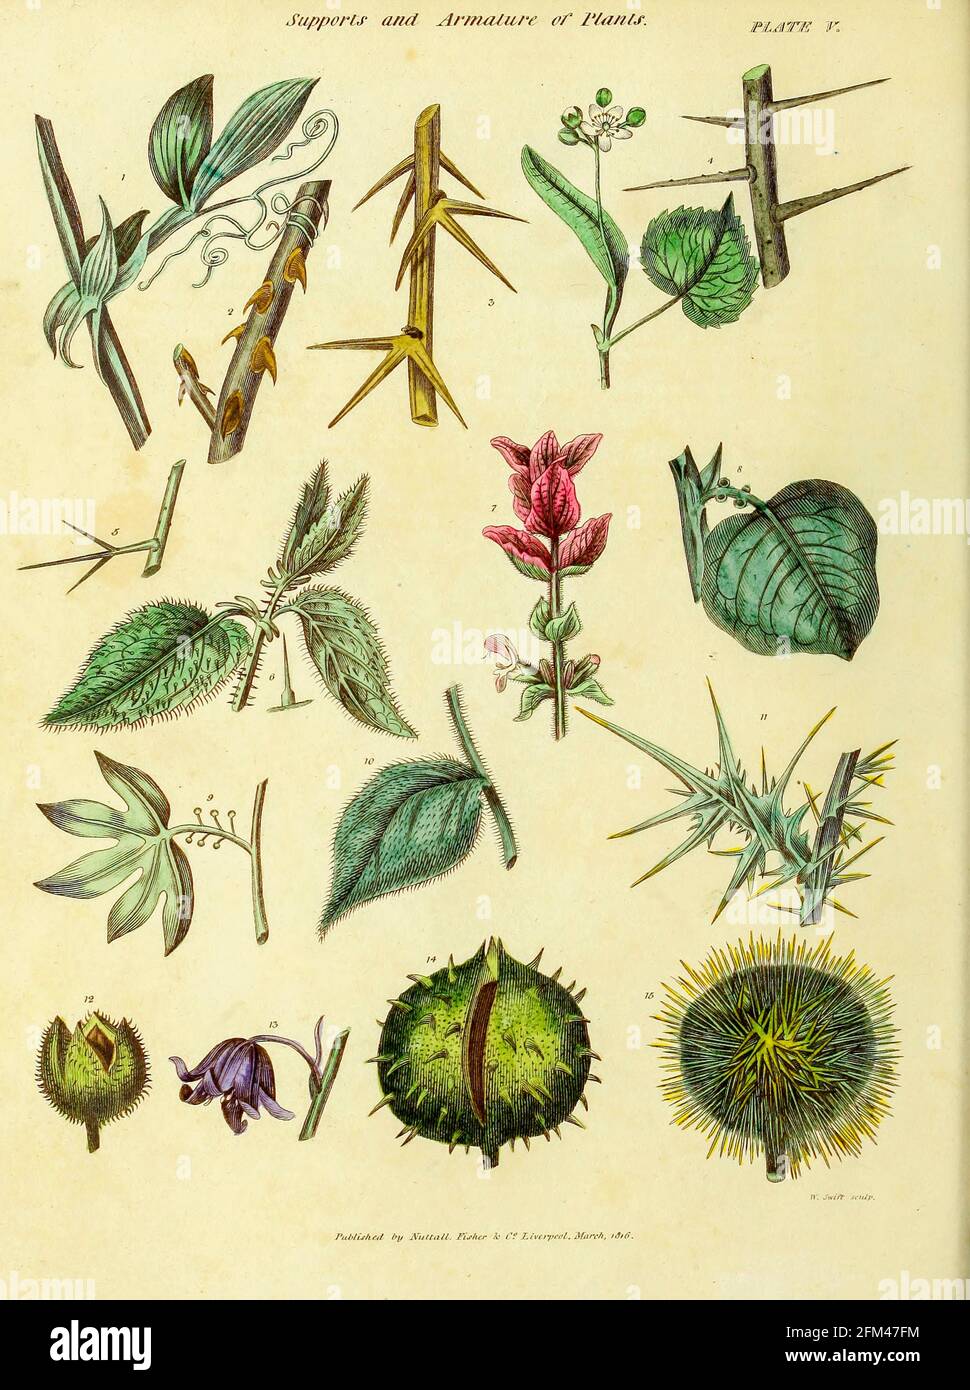 Supports and Armature of Plants from Vol 1 of the book The universal herbal : or botanical, medical and agricultural dictionary : containing an account of all known plants in the world, arranged according to the Linnean system. Specifying the uses to which they are or may be applied By Thomas Green,  Published in 1816 by Nuttall, Fisher & Co. in Liverpool and Printed at the Caxton Press by H. Fisher Stock Photo